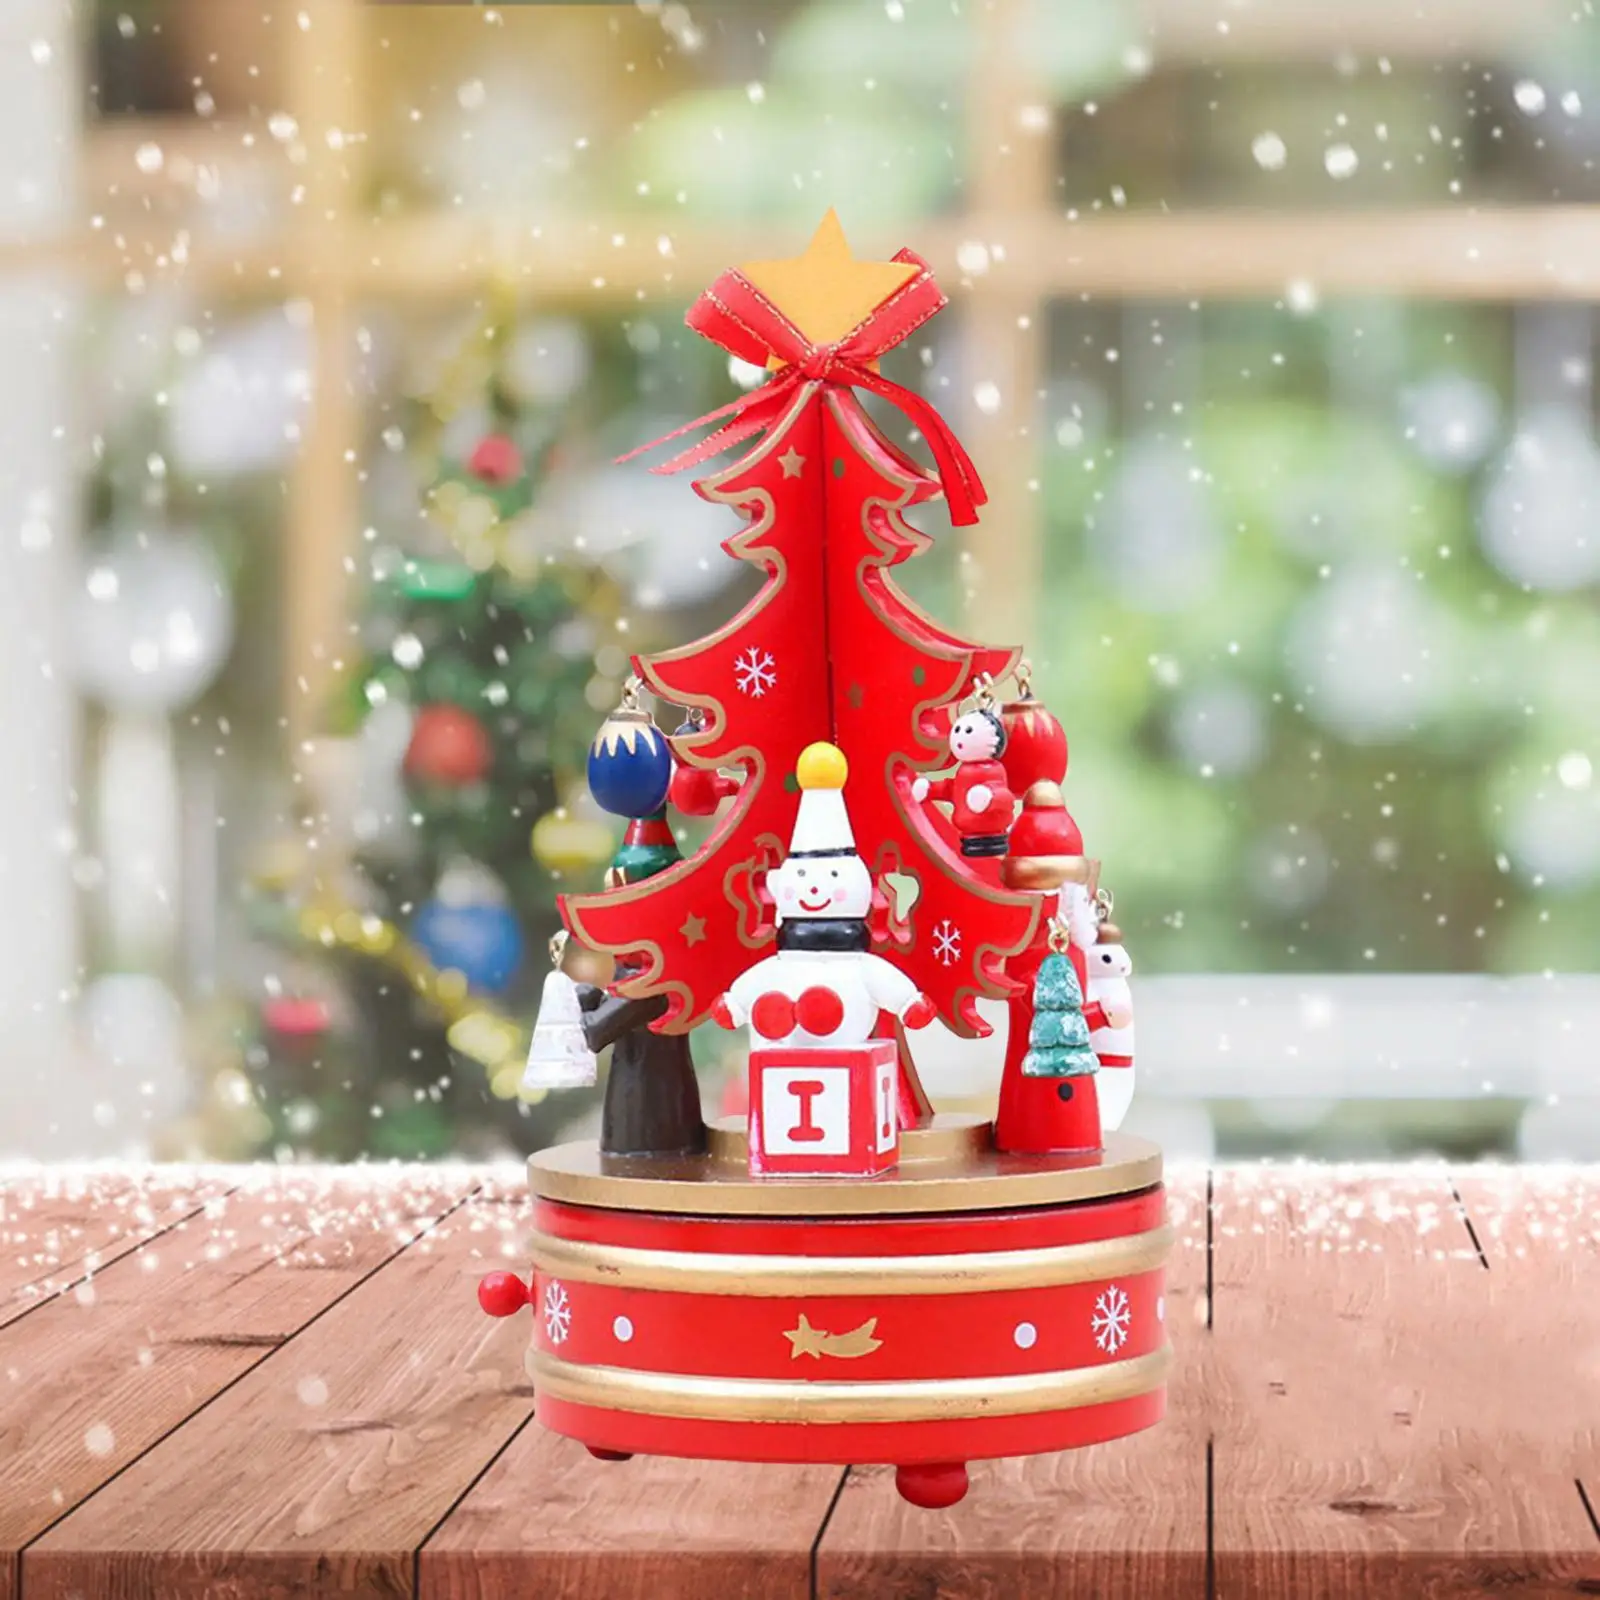 Wooden Music Box Rotating Carousel Toy for Festive Holiday Ornament